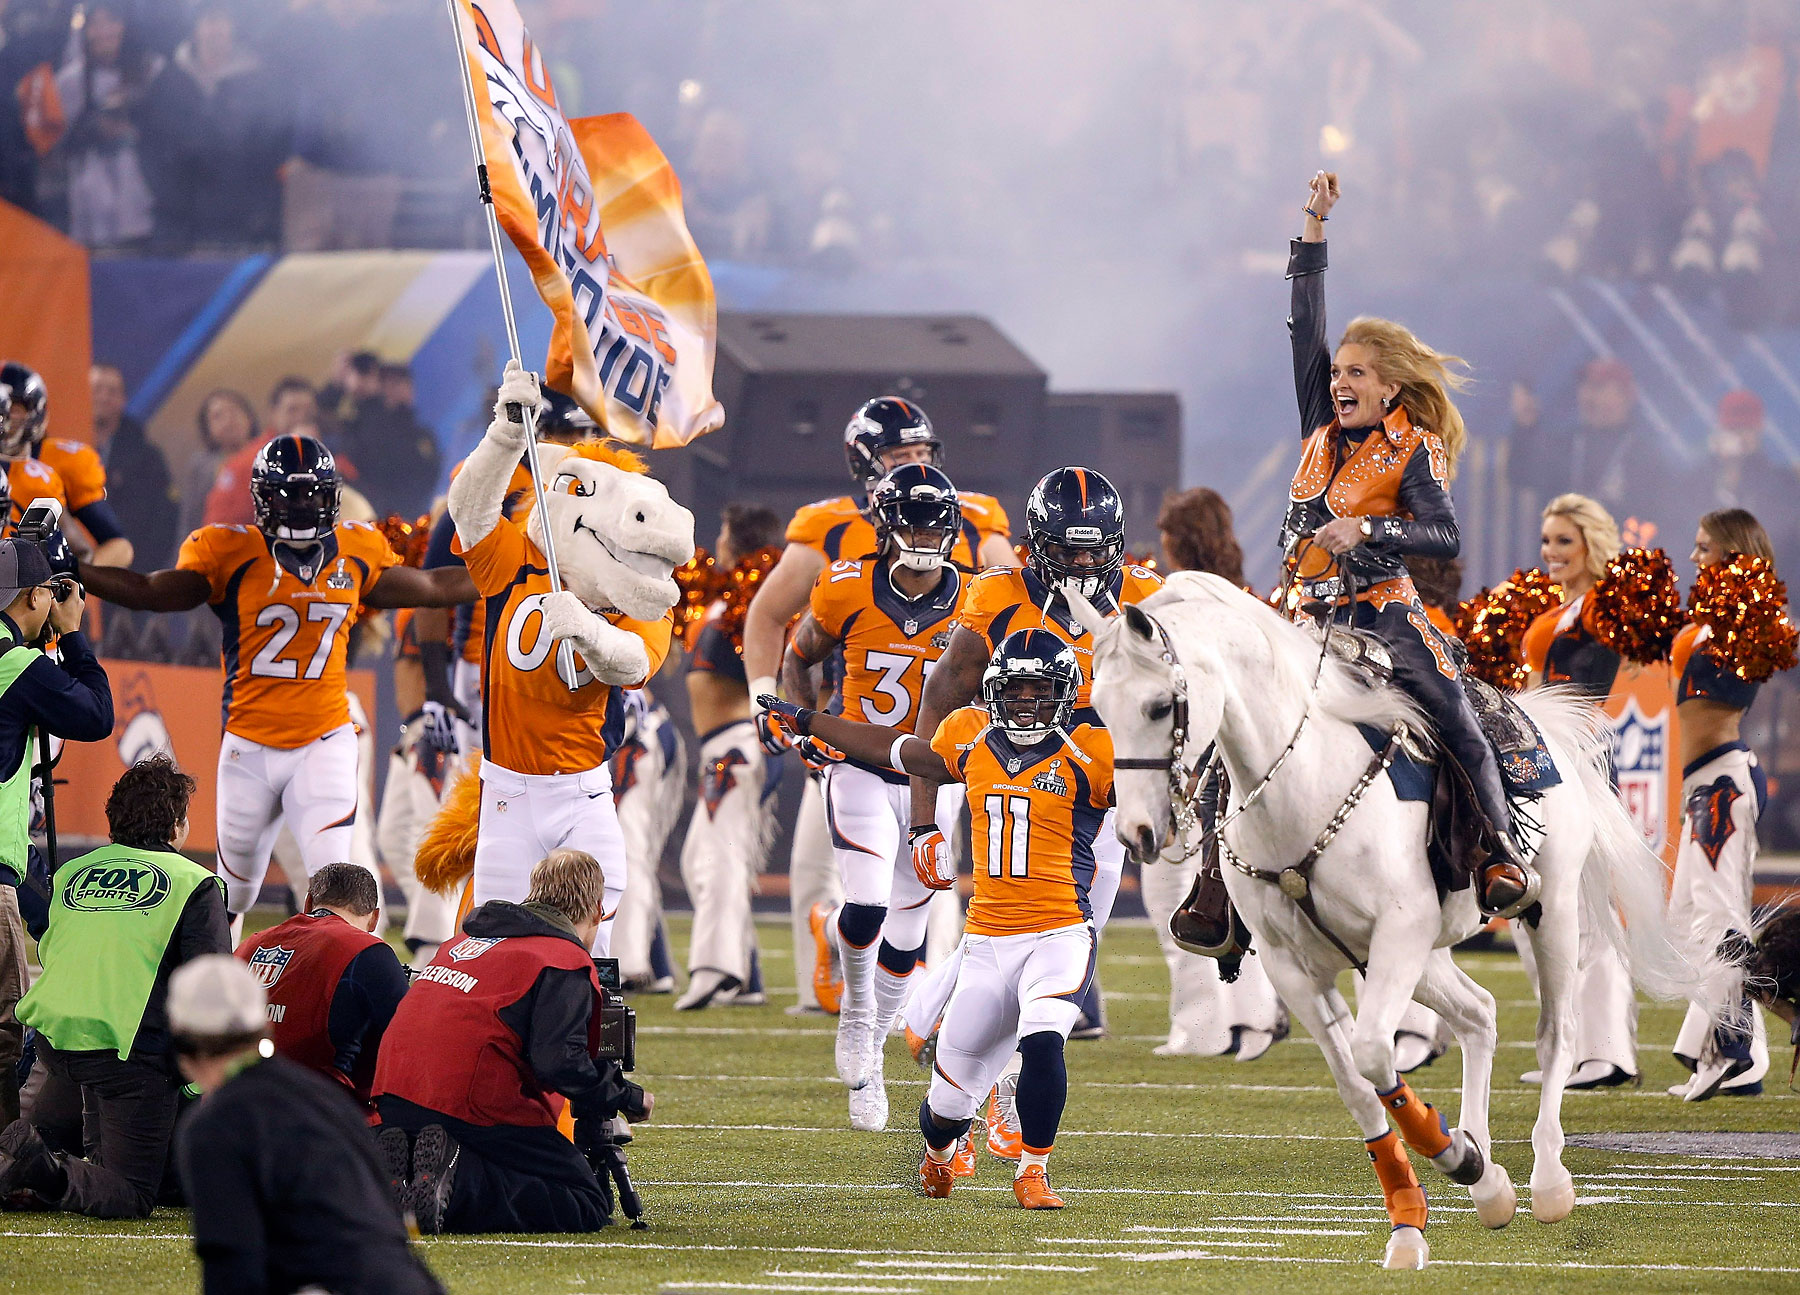 Thunder leads the Denver Broncos players onto the field before the NFL Super Bowl XLVIII.